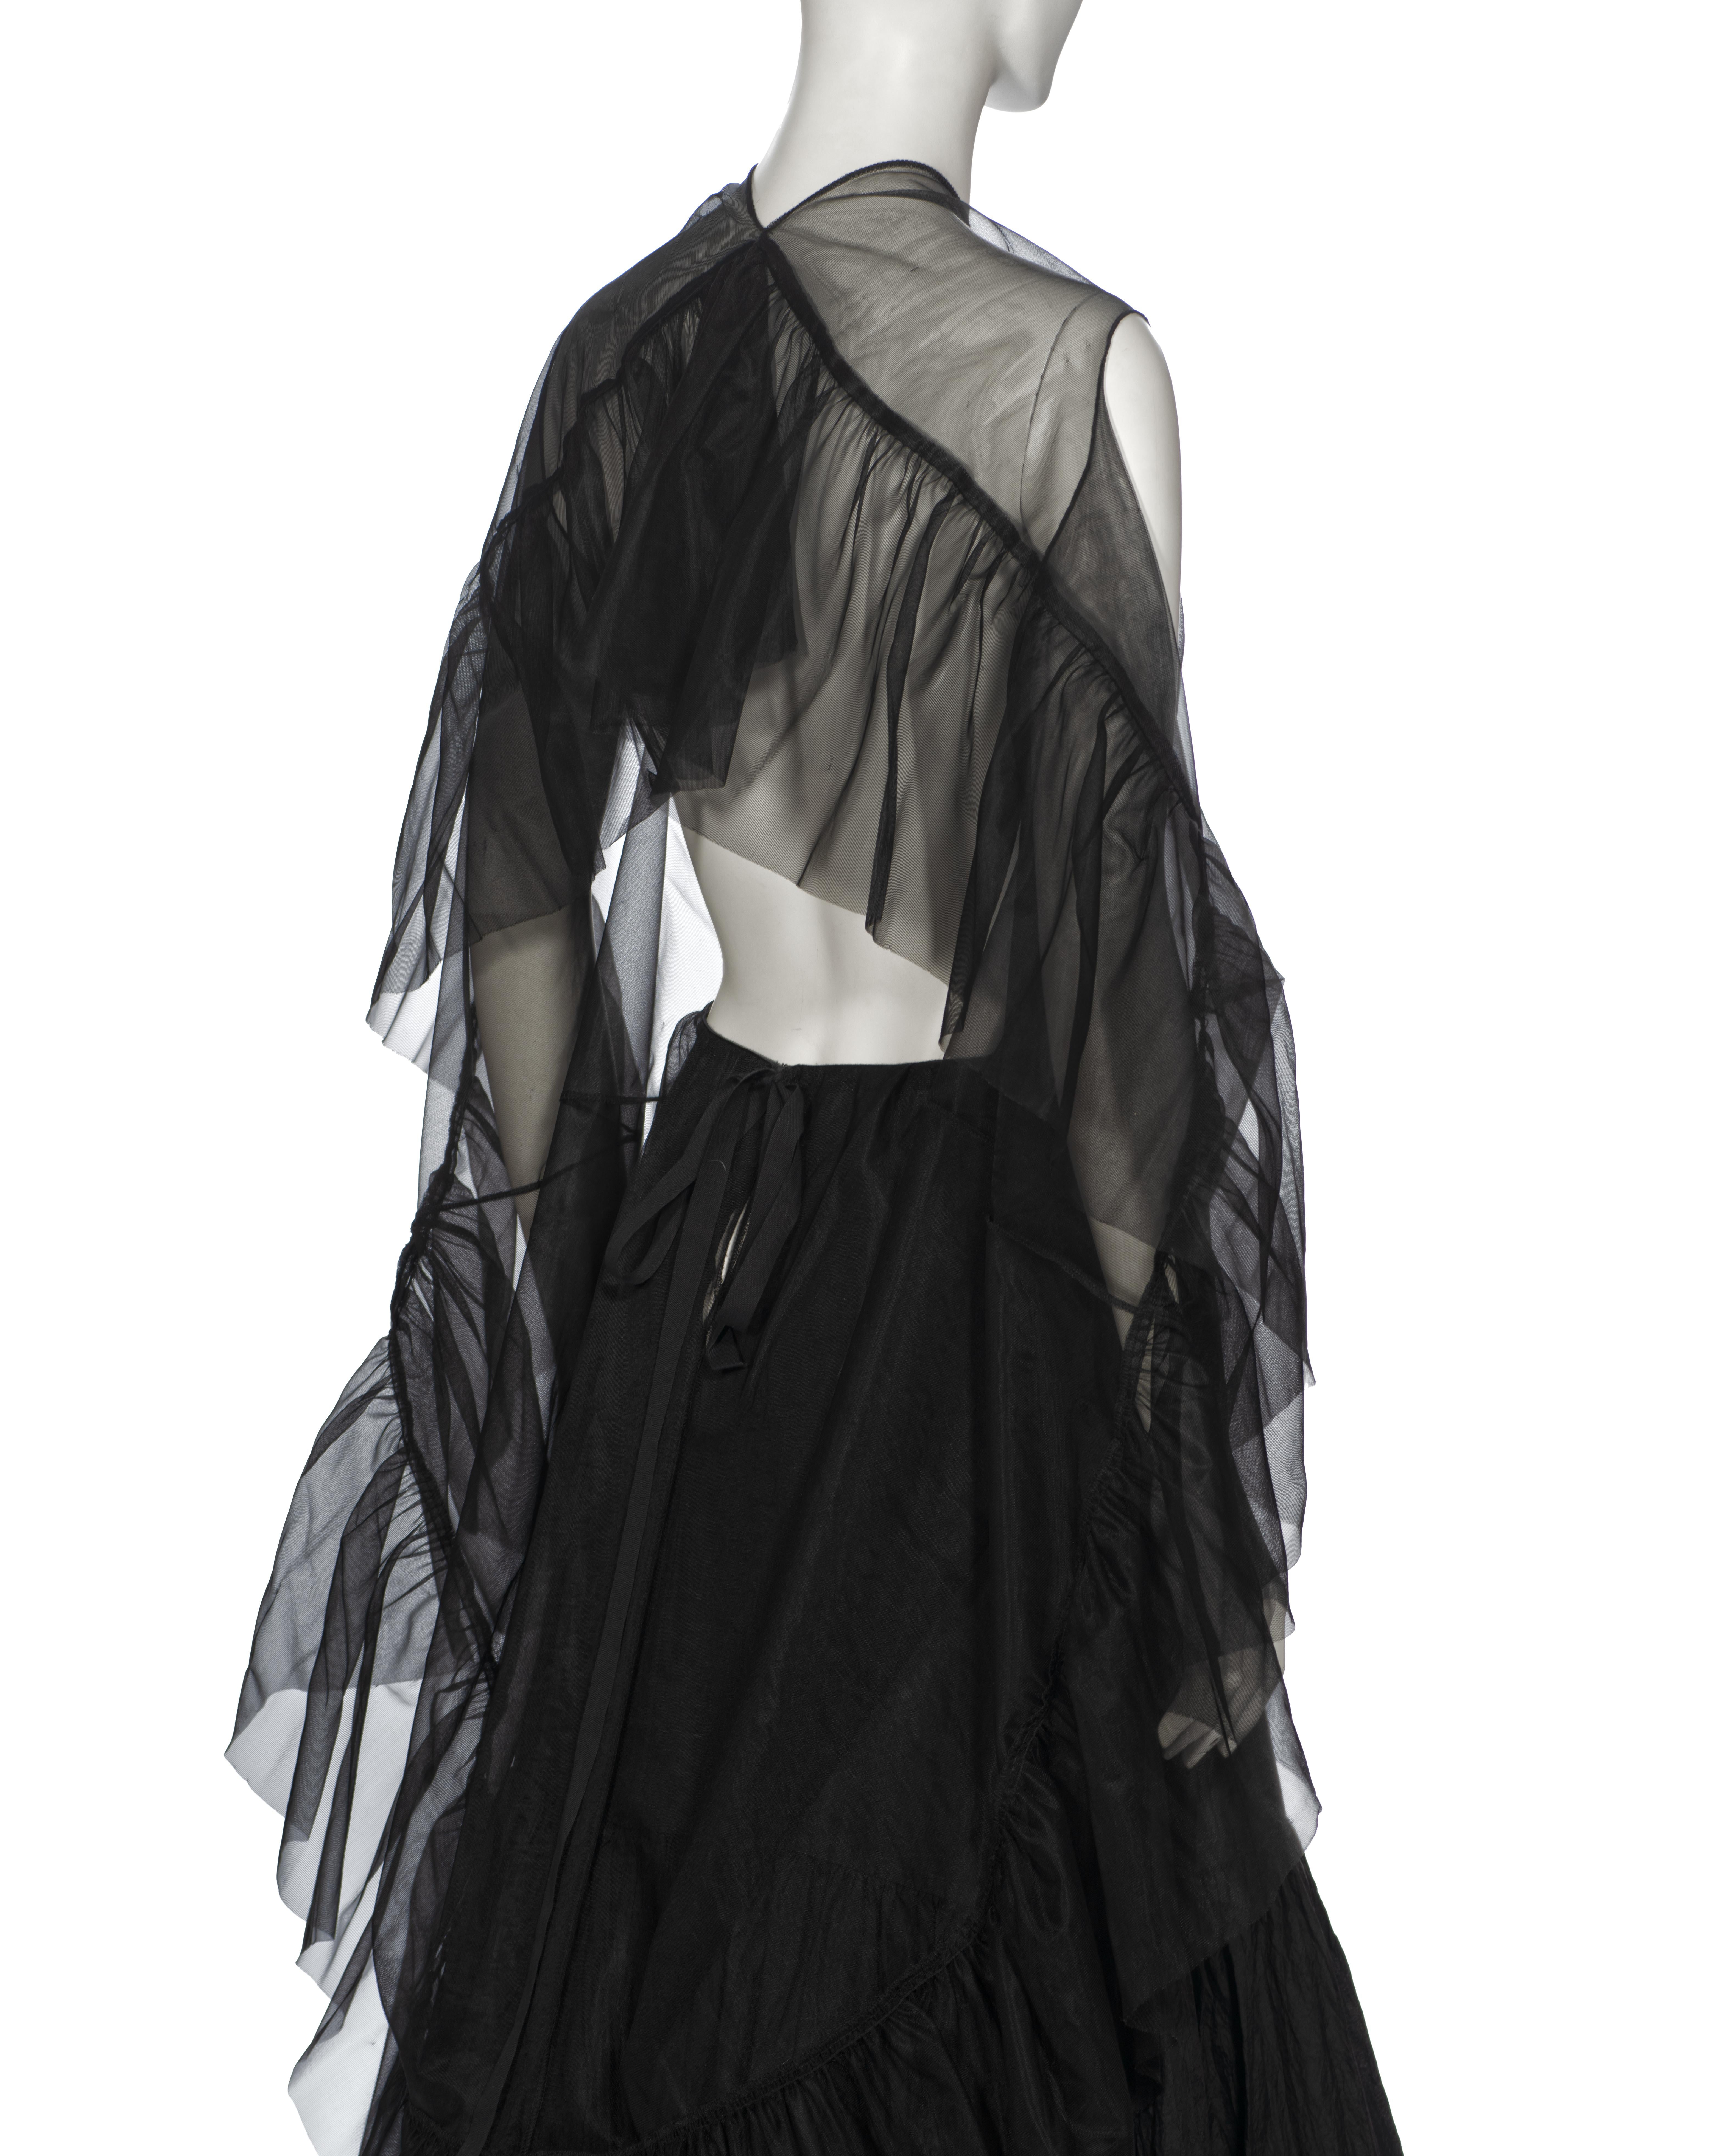 Martin Margiela Artisanal Evening Dress Made Out Of Vintage Petticoats, ss 2003 For Sale 13